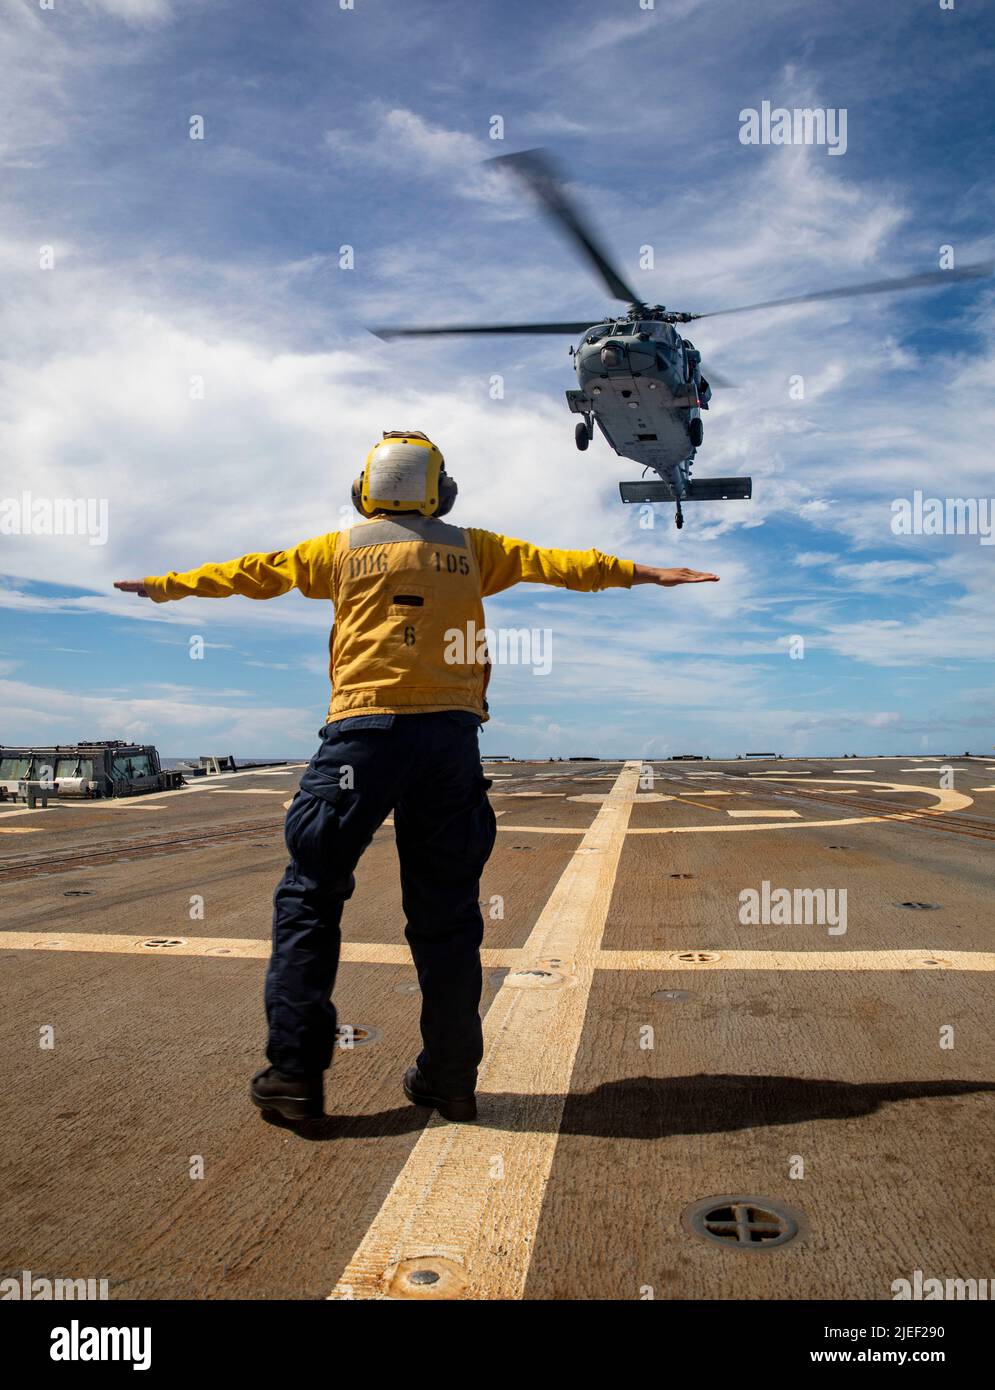 PHILIPPINE SEA (June 2, 2022) Boatswain’s Mate 3rd Class Ashley Iuli, from Los Angeles, signals to the pilot of an MH-60S Sea Hawk helicopter, assigned to the “Chargers” of Helicopter Sea Combat Squadron (HSC) 14, as it takes off from the flight deck of The Arleigh Burke-class guided-missile destroyer USS Dewey (DDG 105) during a vertical replenishment with Ticonderoga-class guided-missile cruiser USS Mobile Bay (CG 53). Abraham Lincoln Strike Group is on a scheduled deployment in the U.S. 7th Fleet area of operations to enhance interoperability through alliances and partnerships while serving Stock Photo